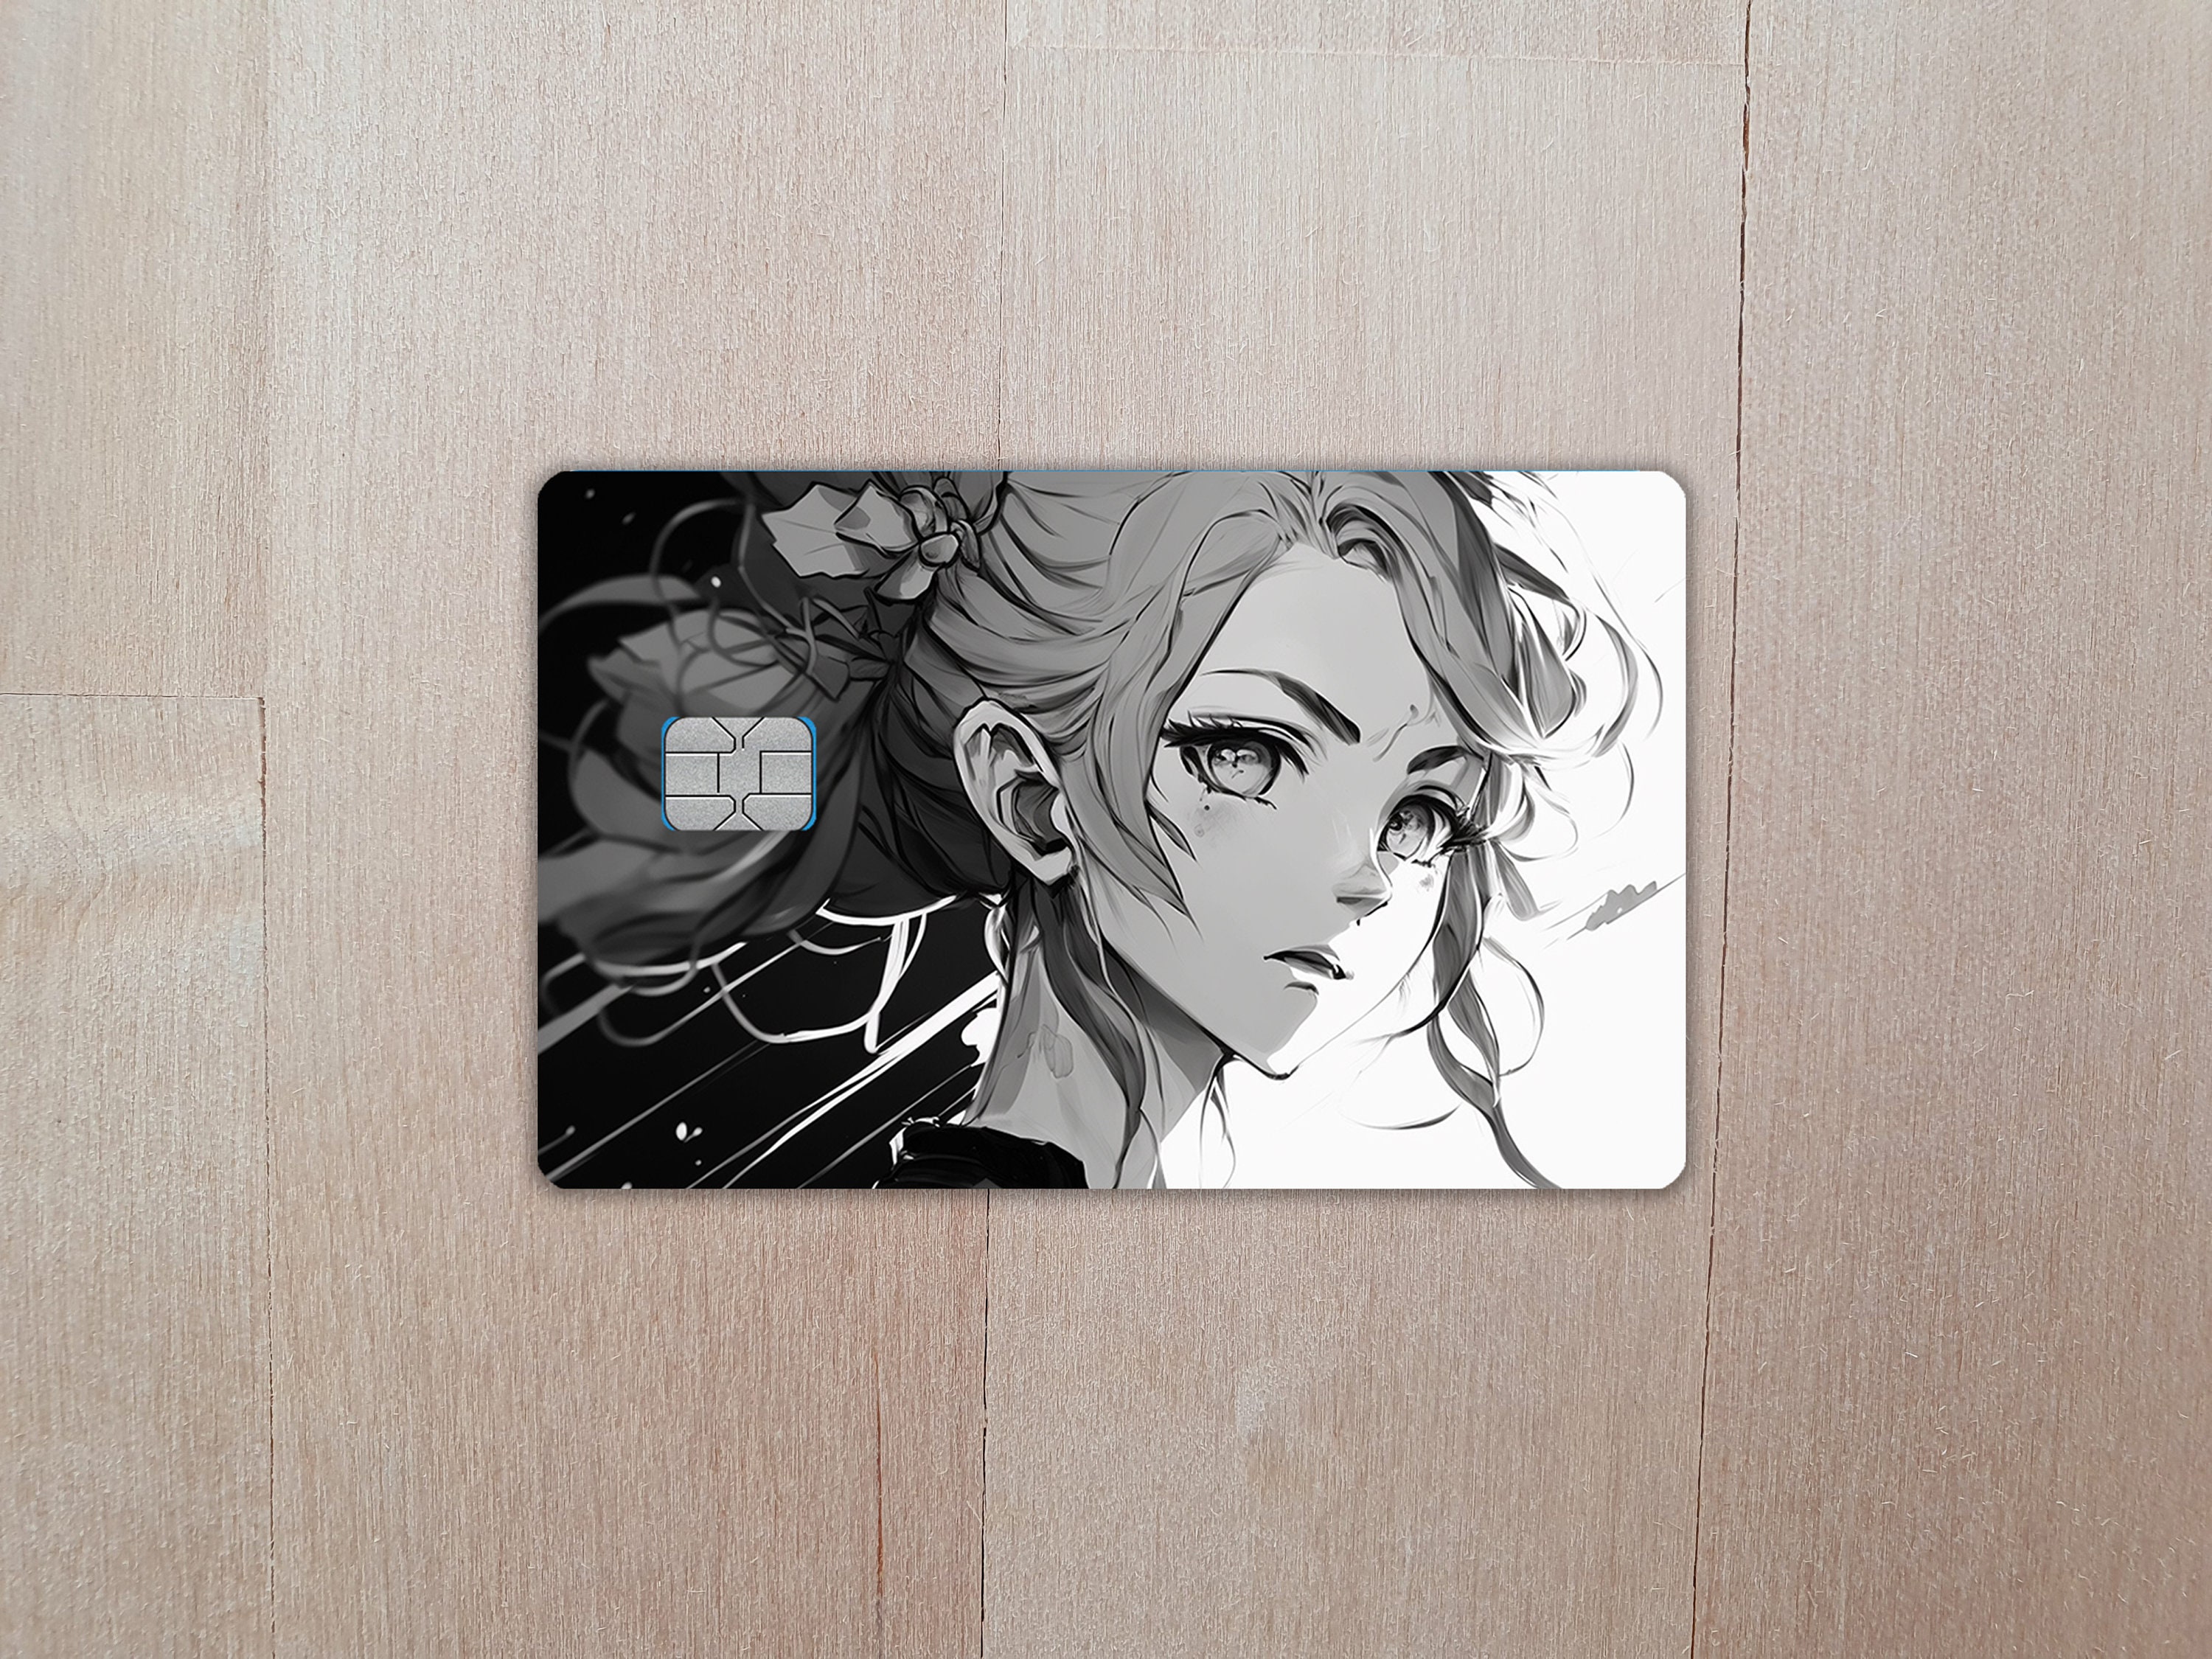 We are Going Shopping  Anime  Credit Card Sticker  Credit Card Skin   eBay